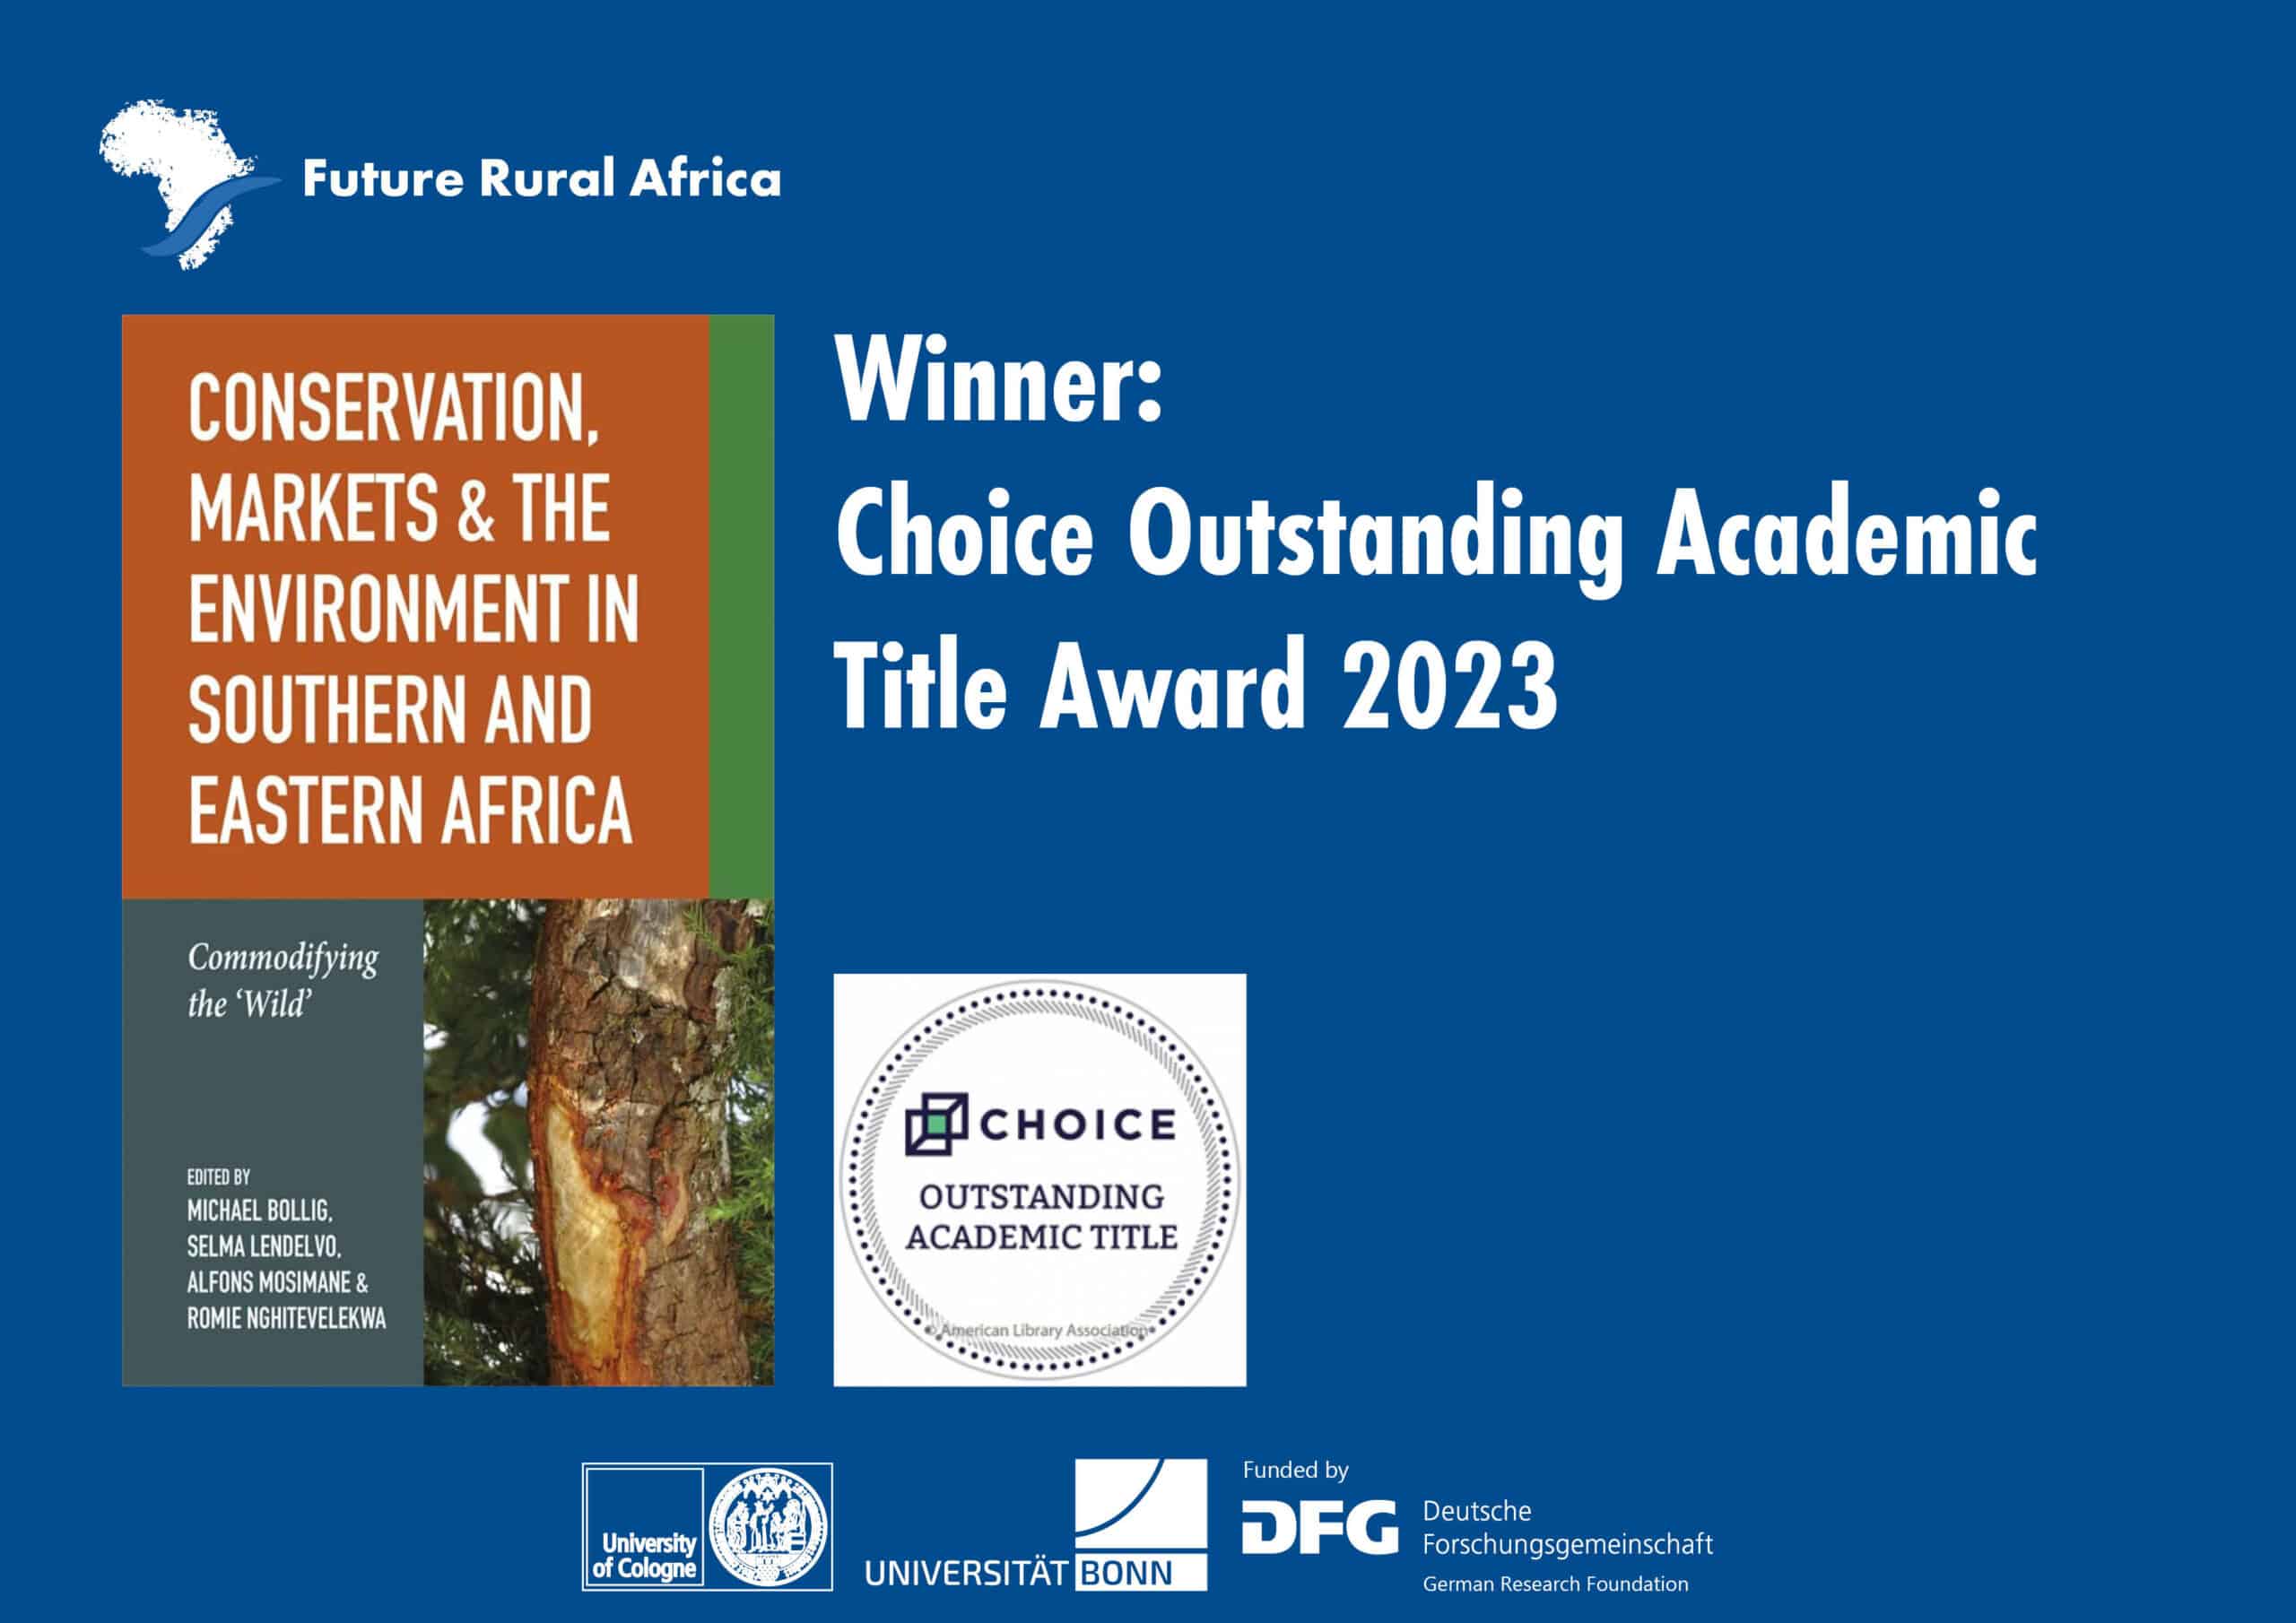 Cover image announcing the winner of the choice outstanding academic title award 2023